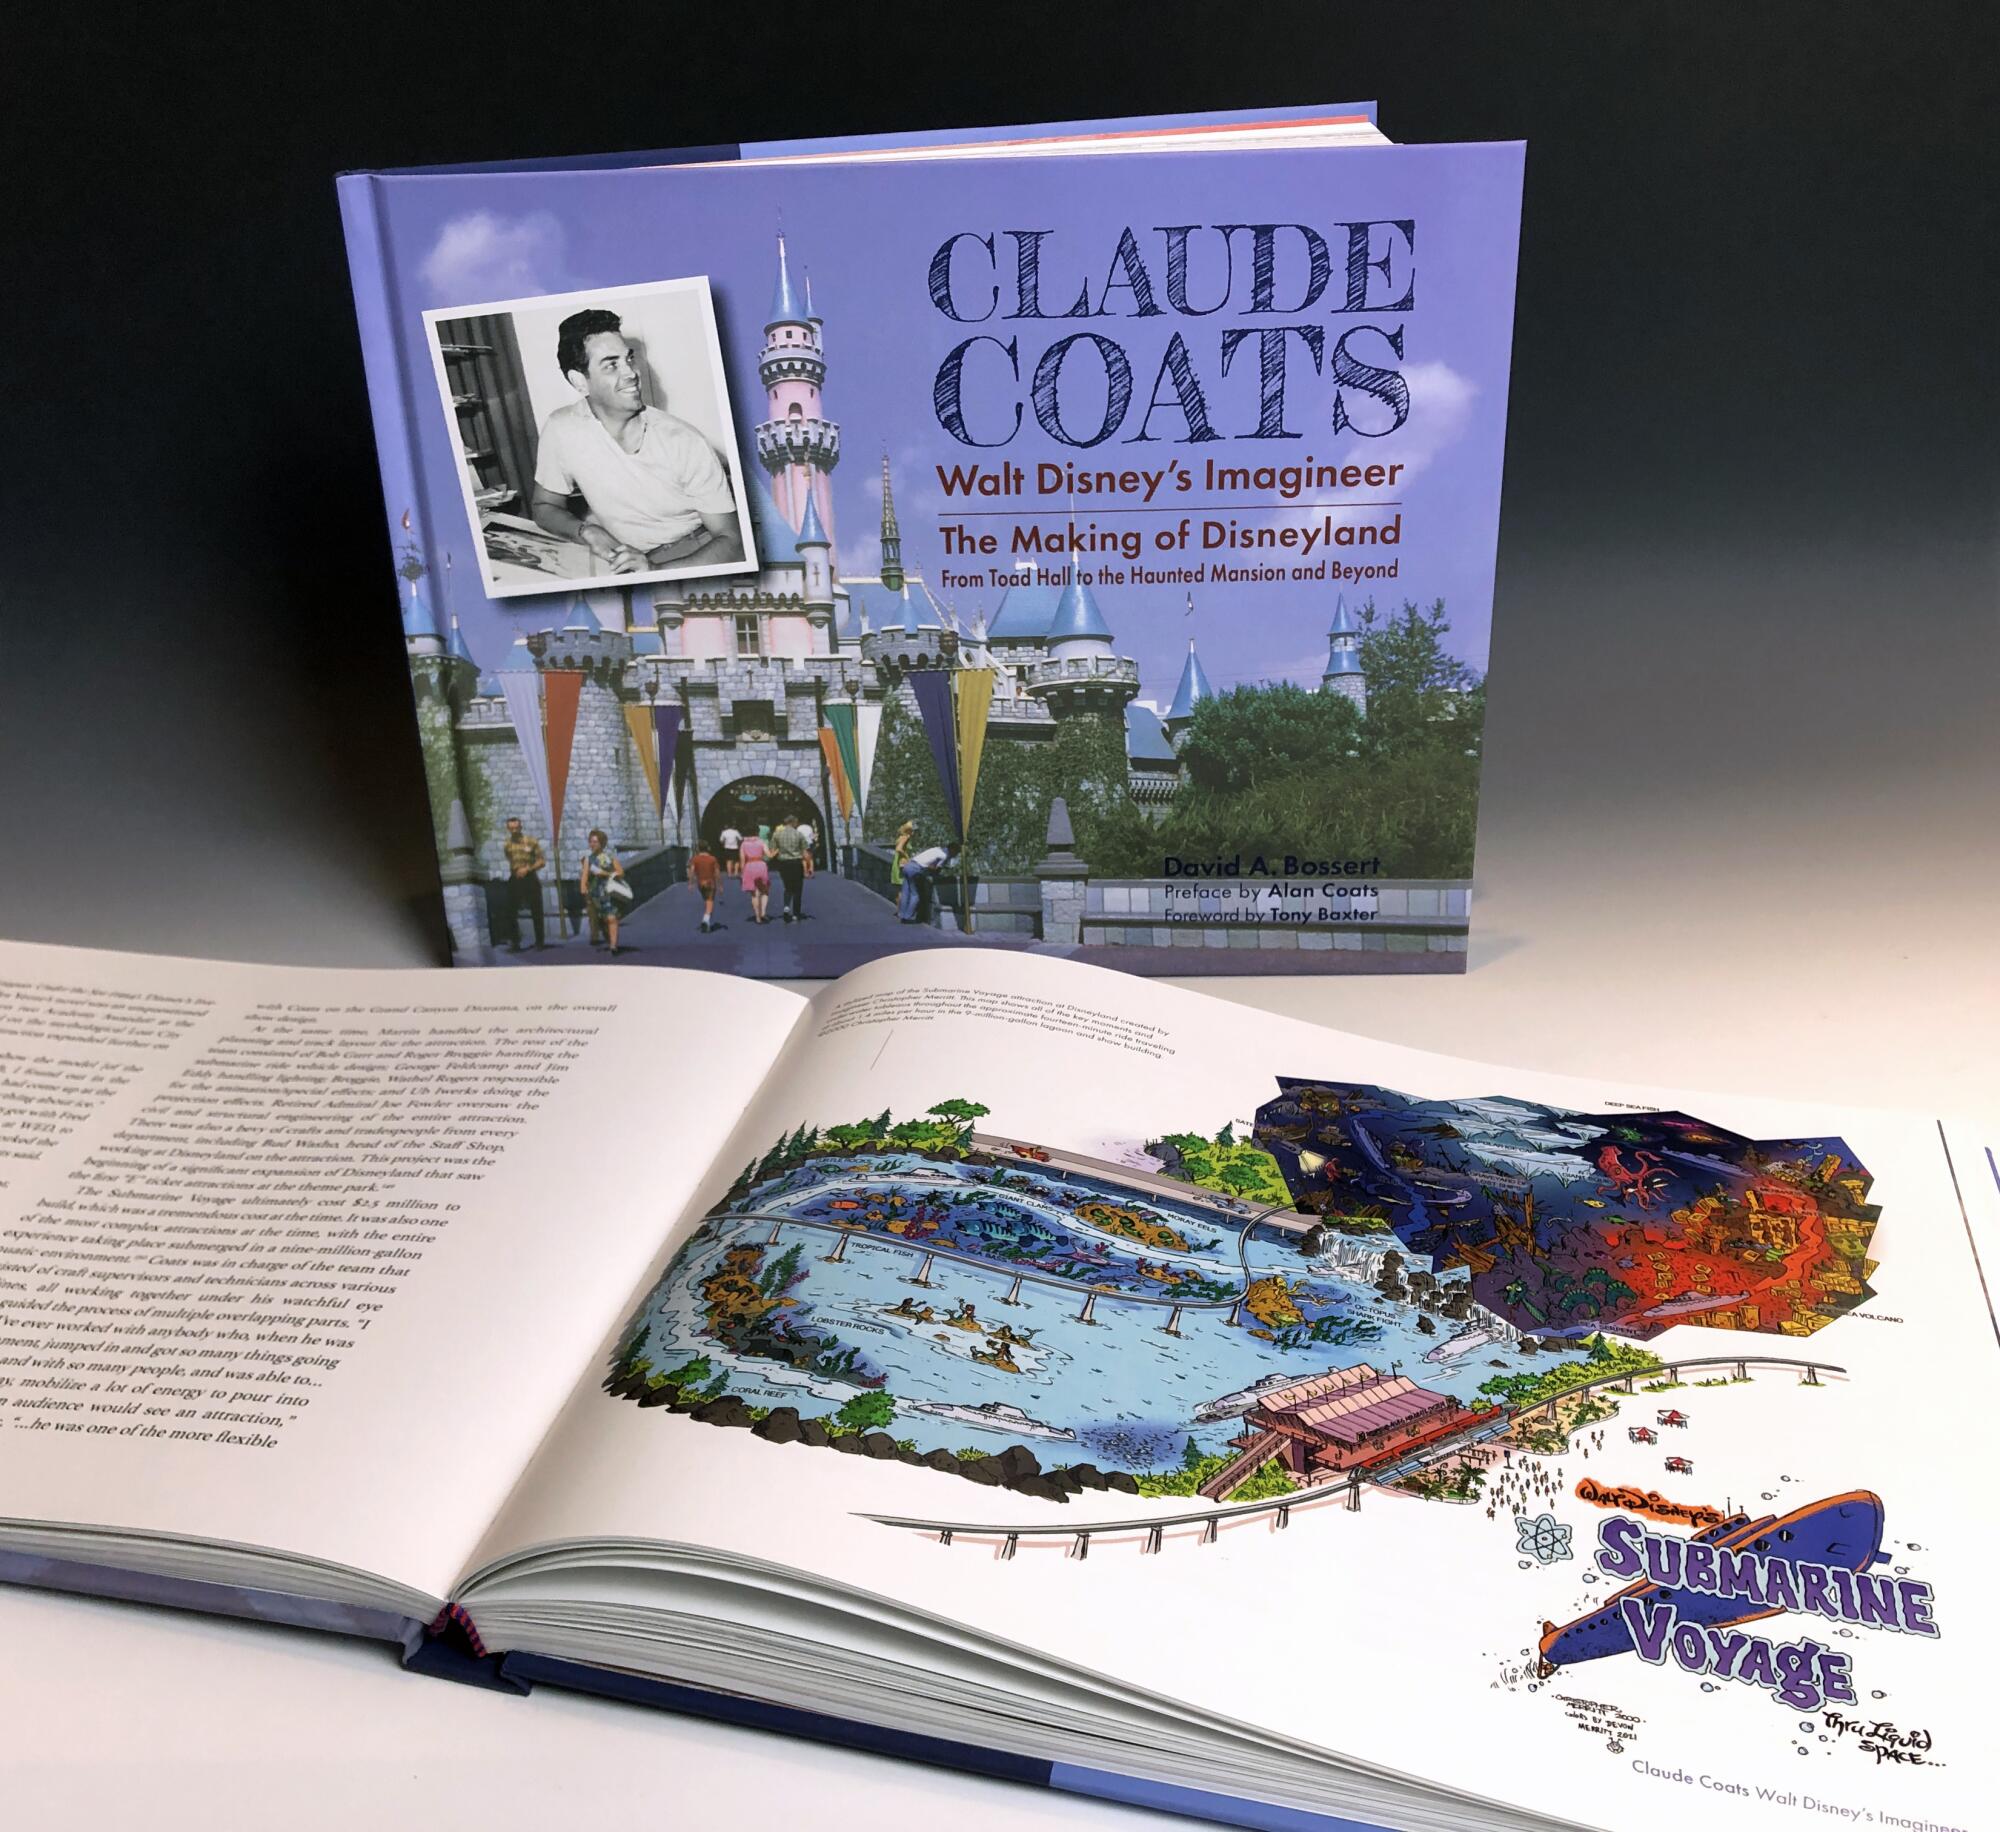 "Claude Coats: Walt Disney’s Imagineer" and inside pages showing a colorful map.